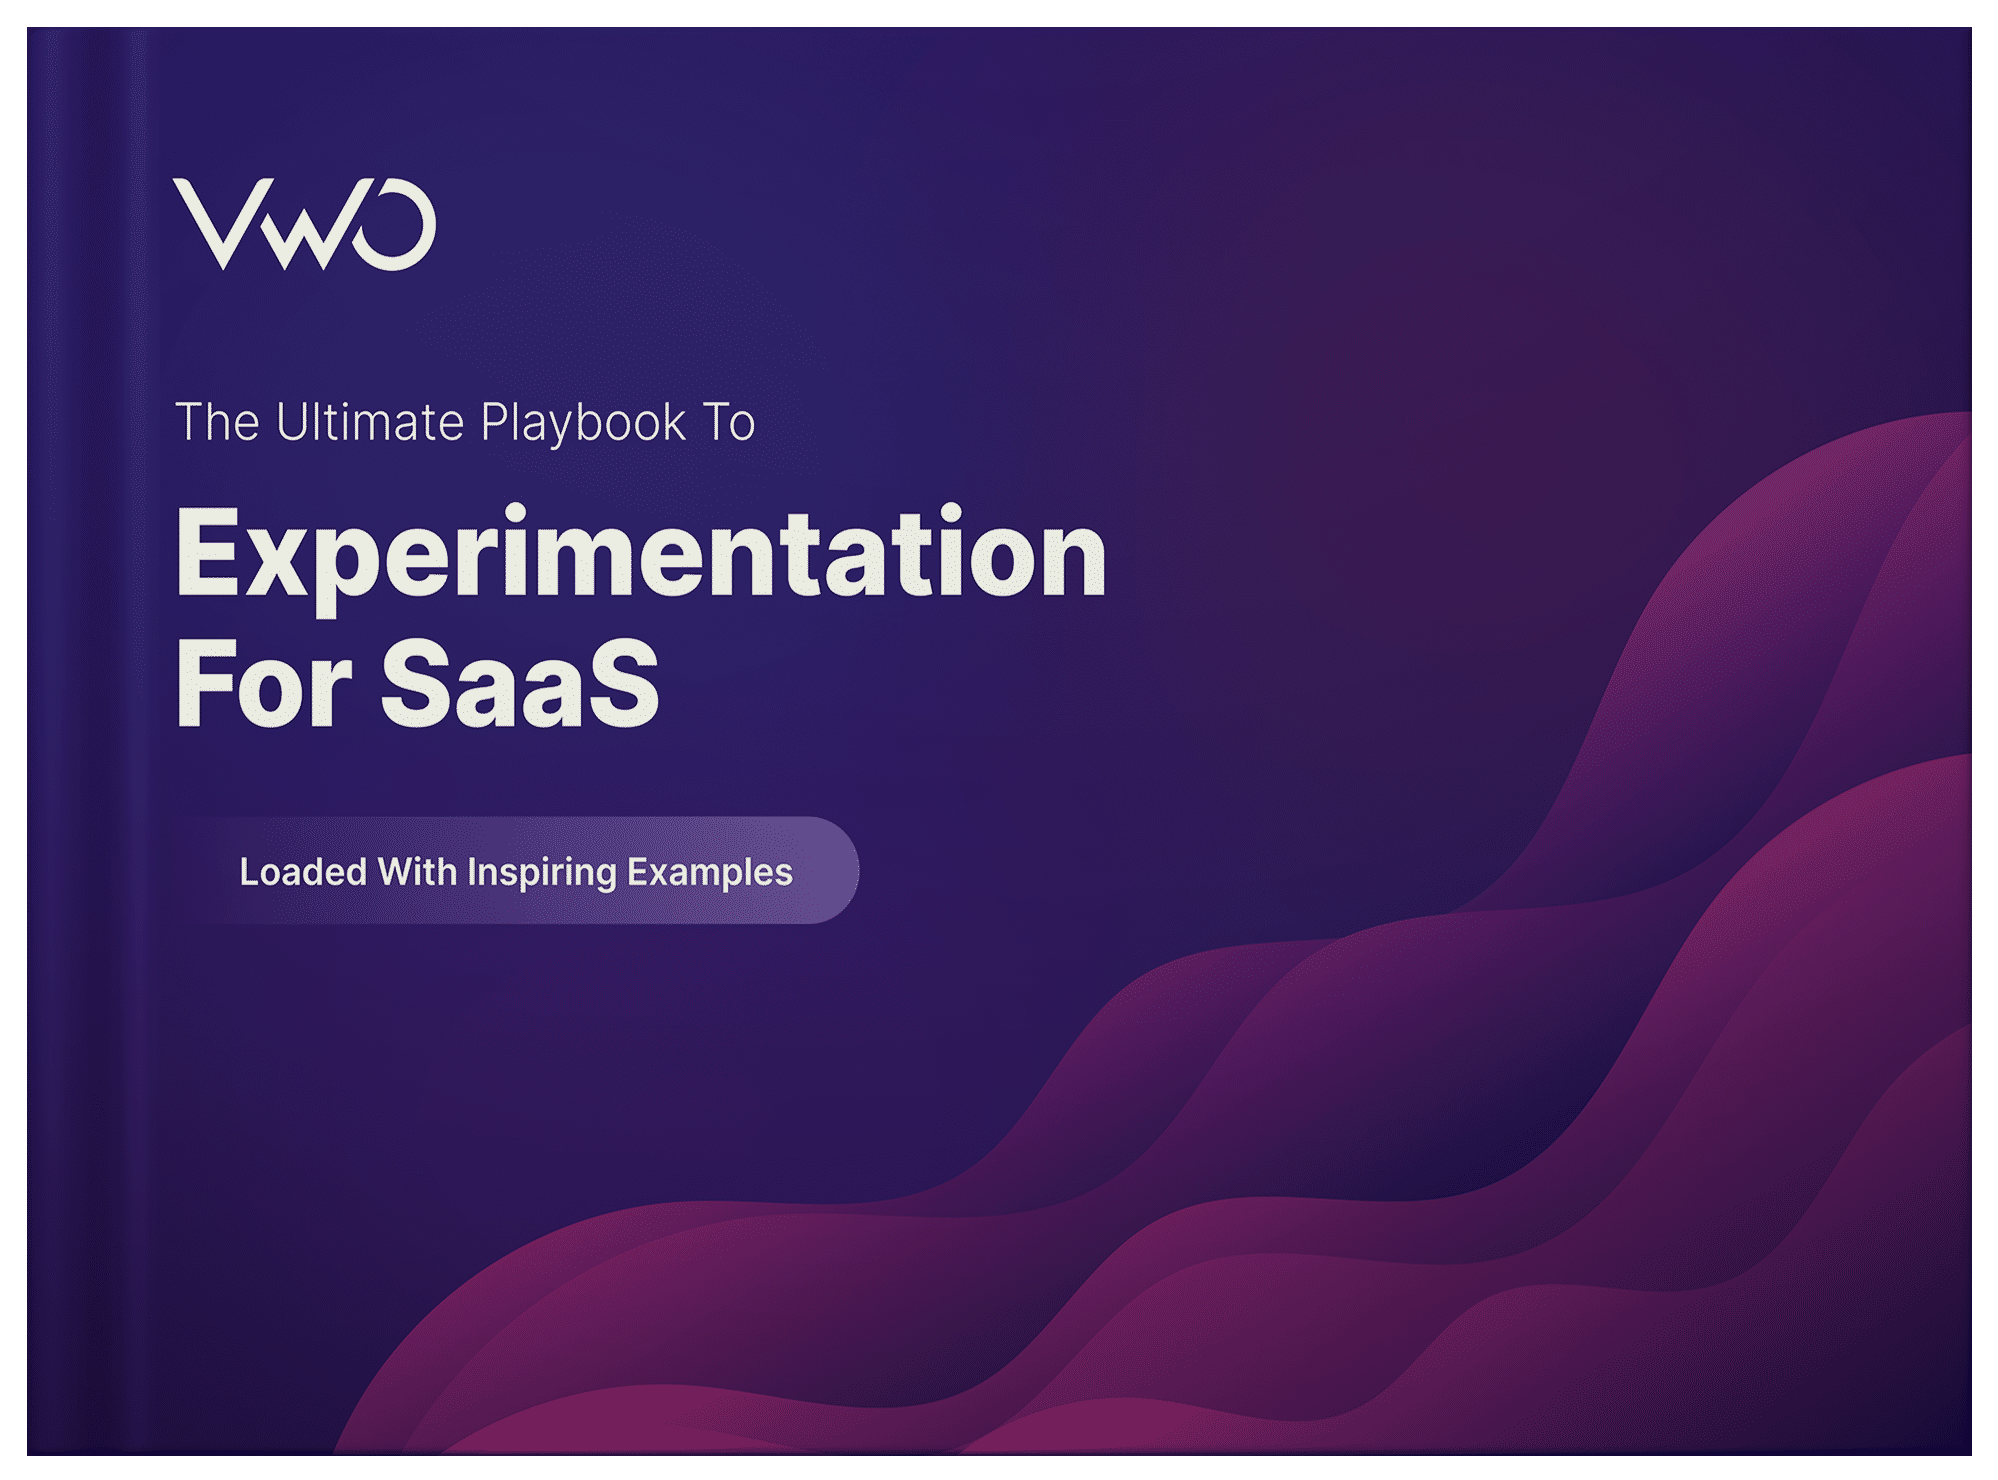 The Ultimate Playbook to Experimentation for SaaS